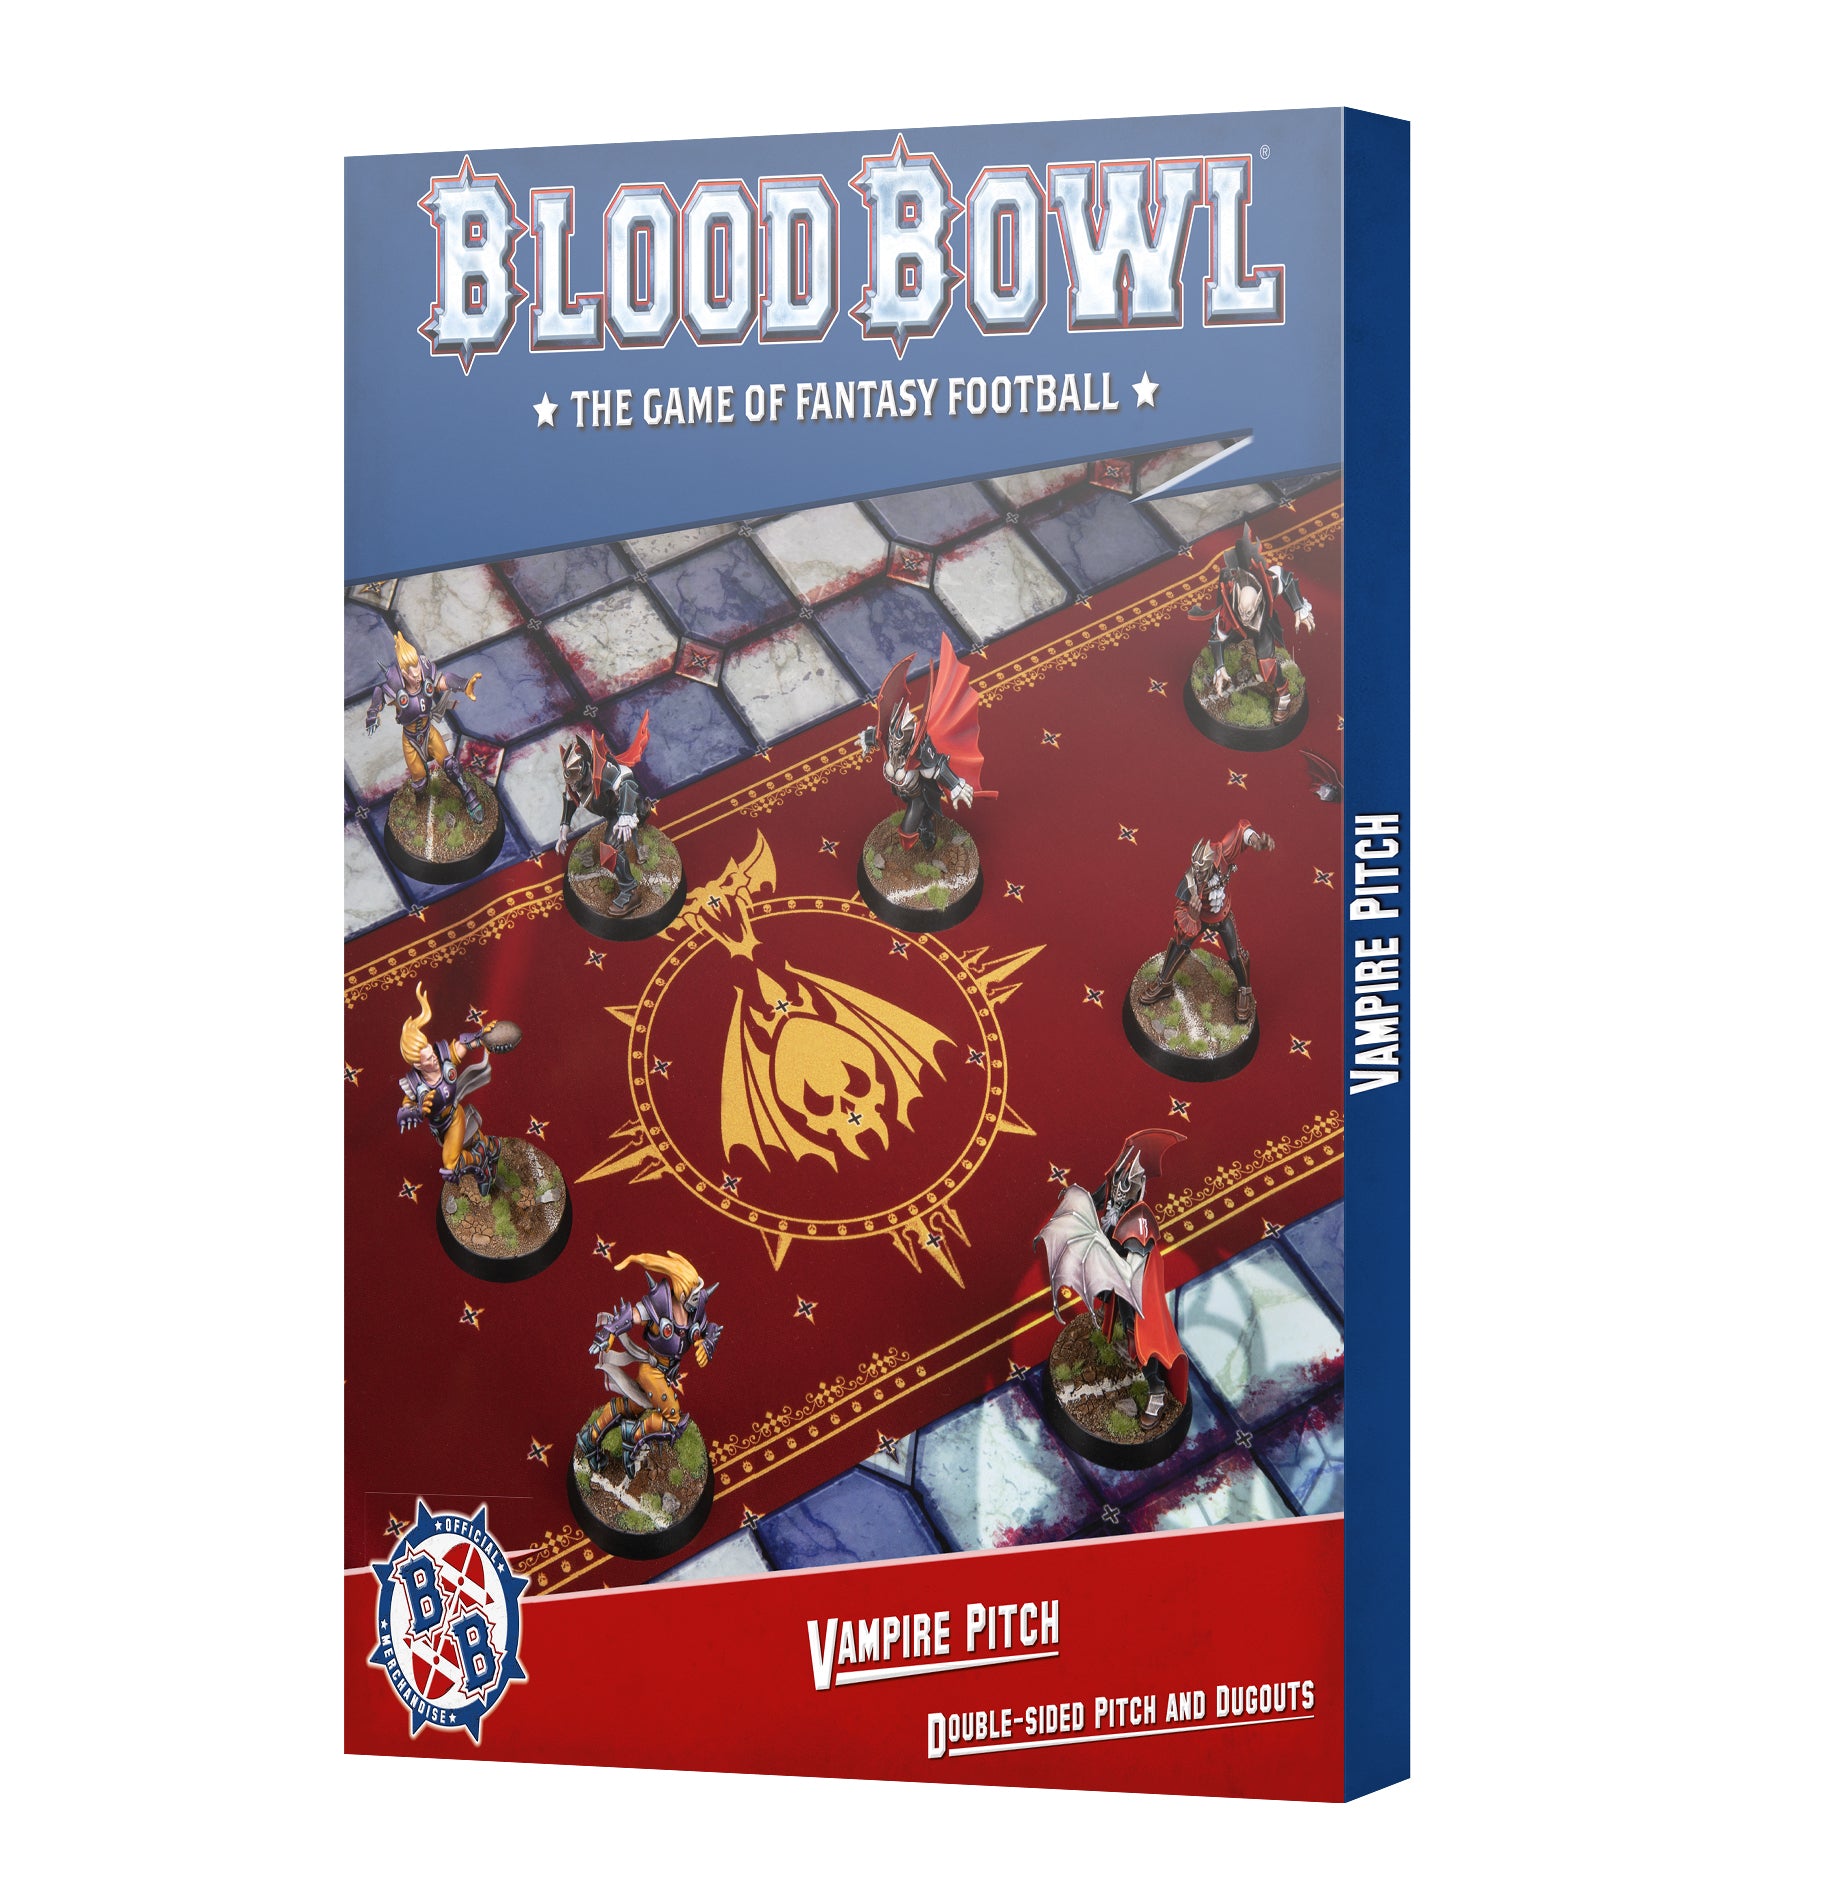 BLOOD BOWL VAMPIRE TEAM PITCH & DUGOUTS | BD Cosmos